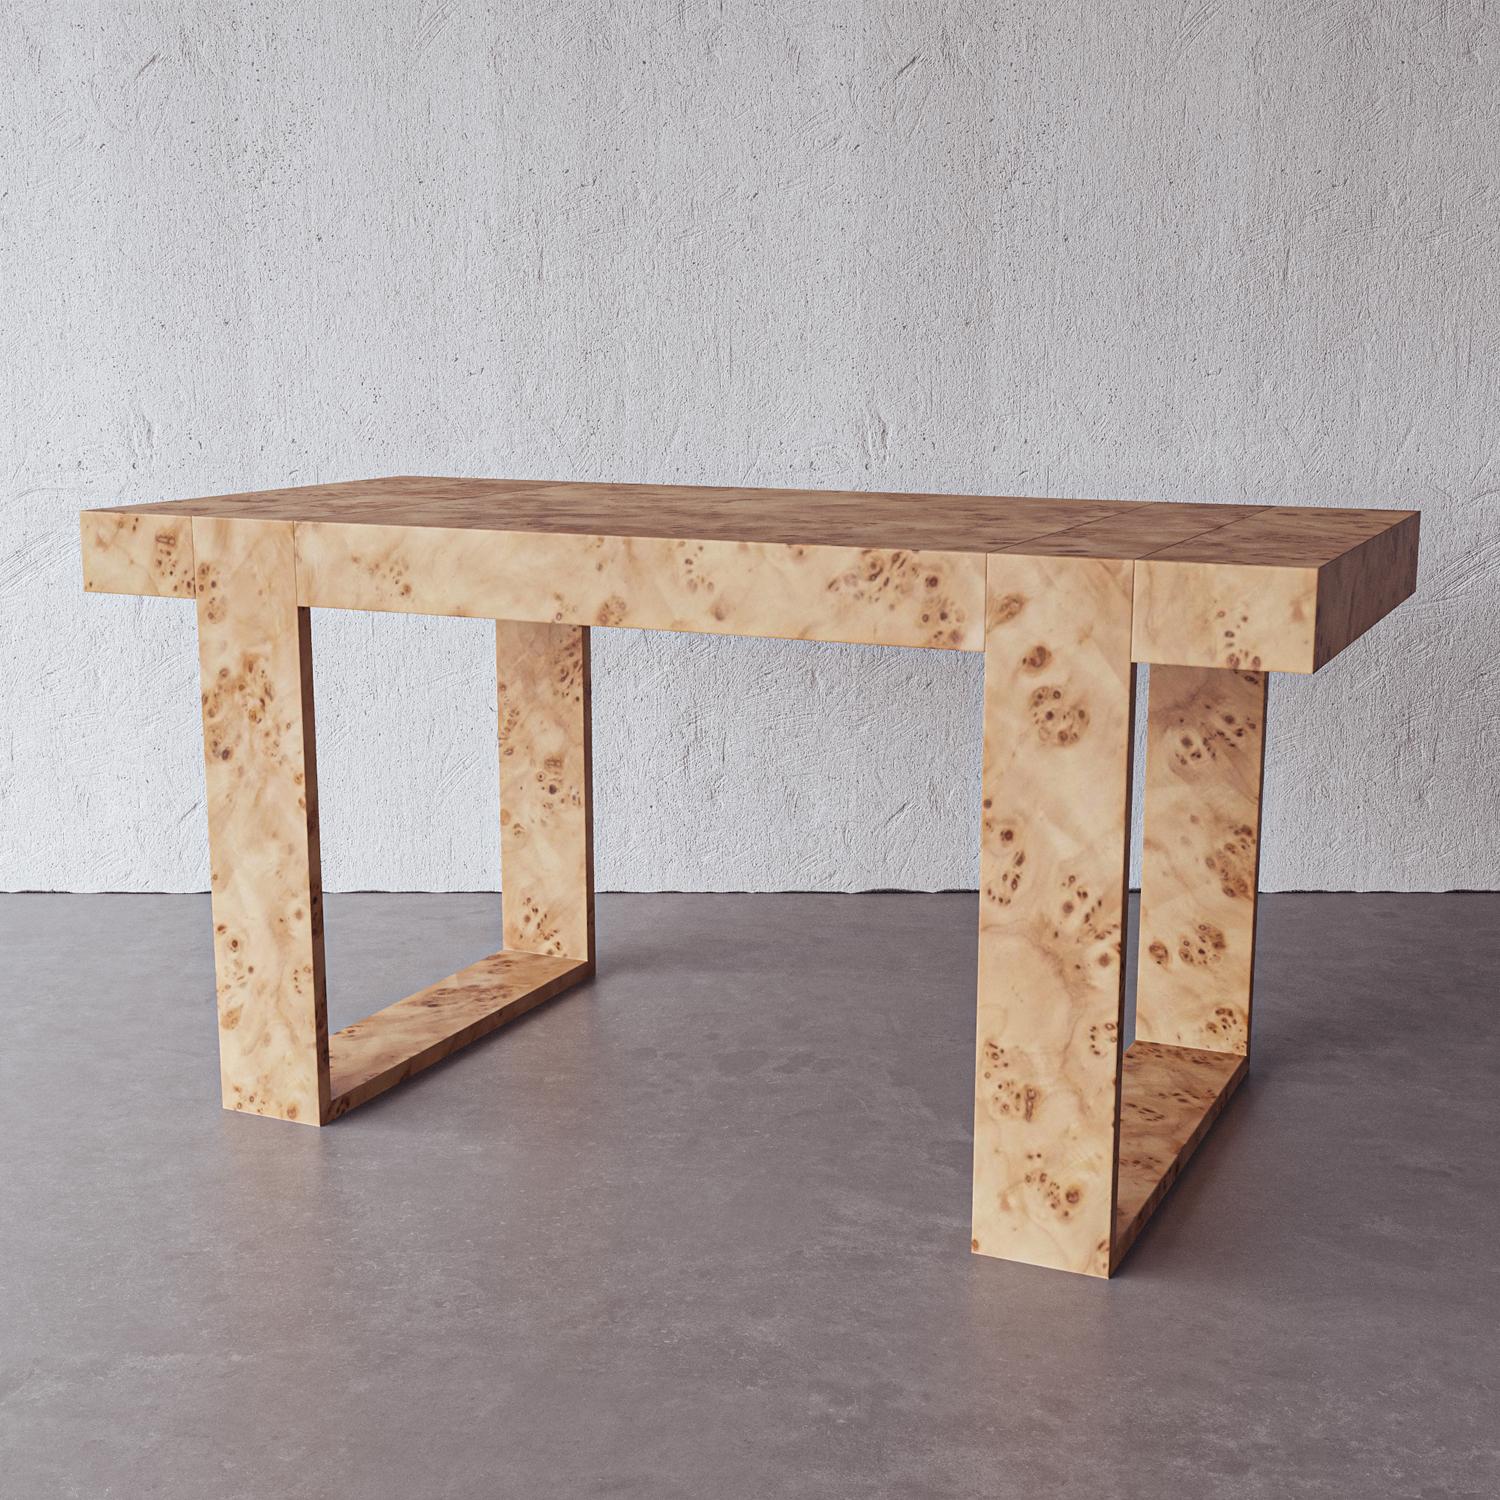 Clean lines, an open structure and natural Mappa burl wood compose a multi-functional desk for any home. The versatile scale works beautifully as a table, vanity or console. Handmade by artistans in Vietnam, this piece is complementary to a range of